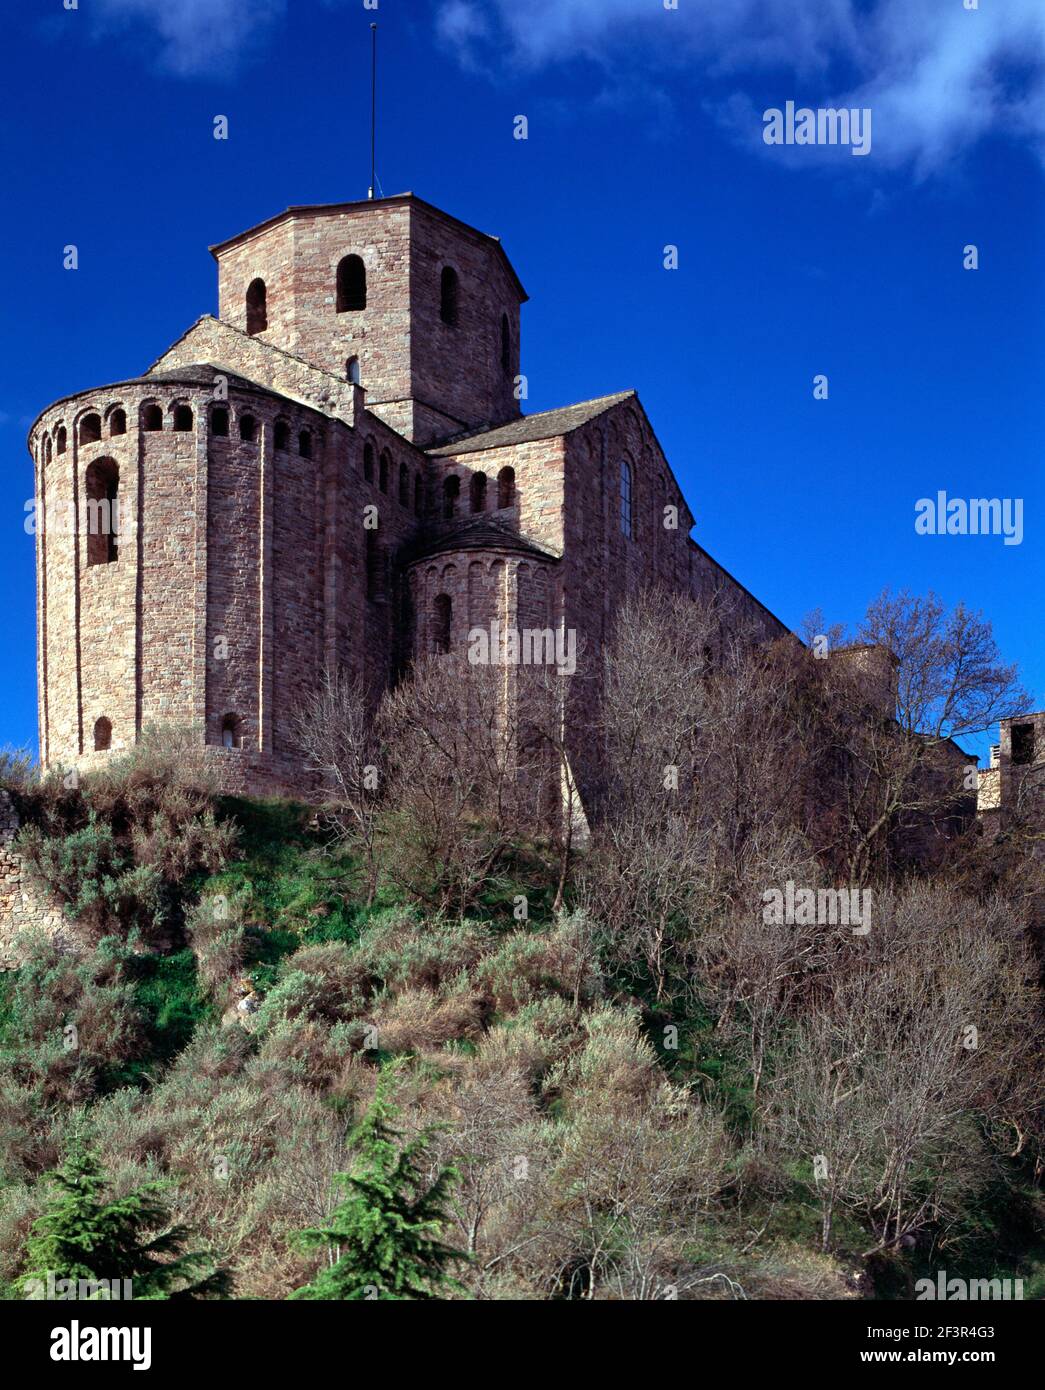 Saint Vicenc, Catalan-Lombard style church and hill fortification in Cardona, Catalonia, Spain. Stock Photo